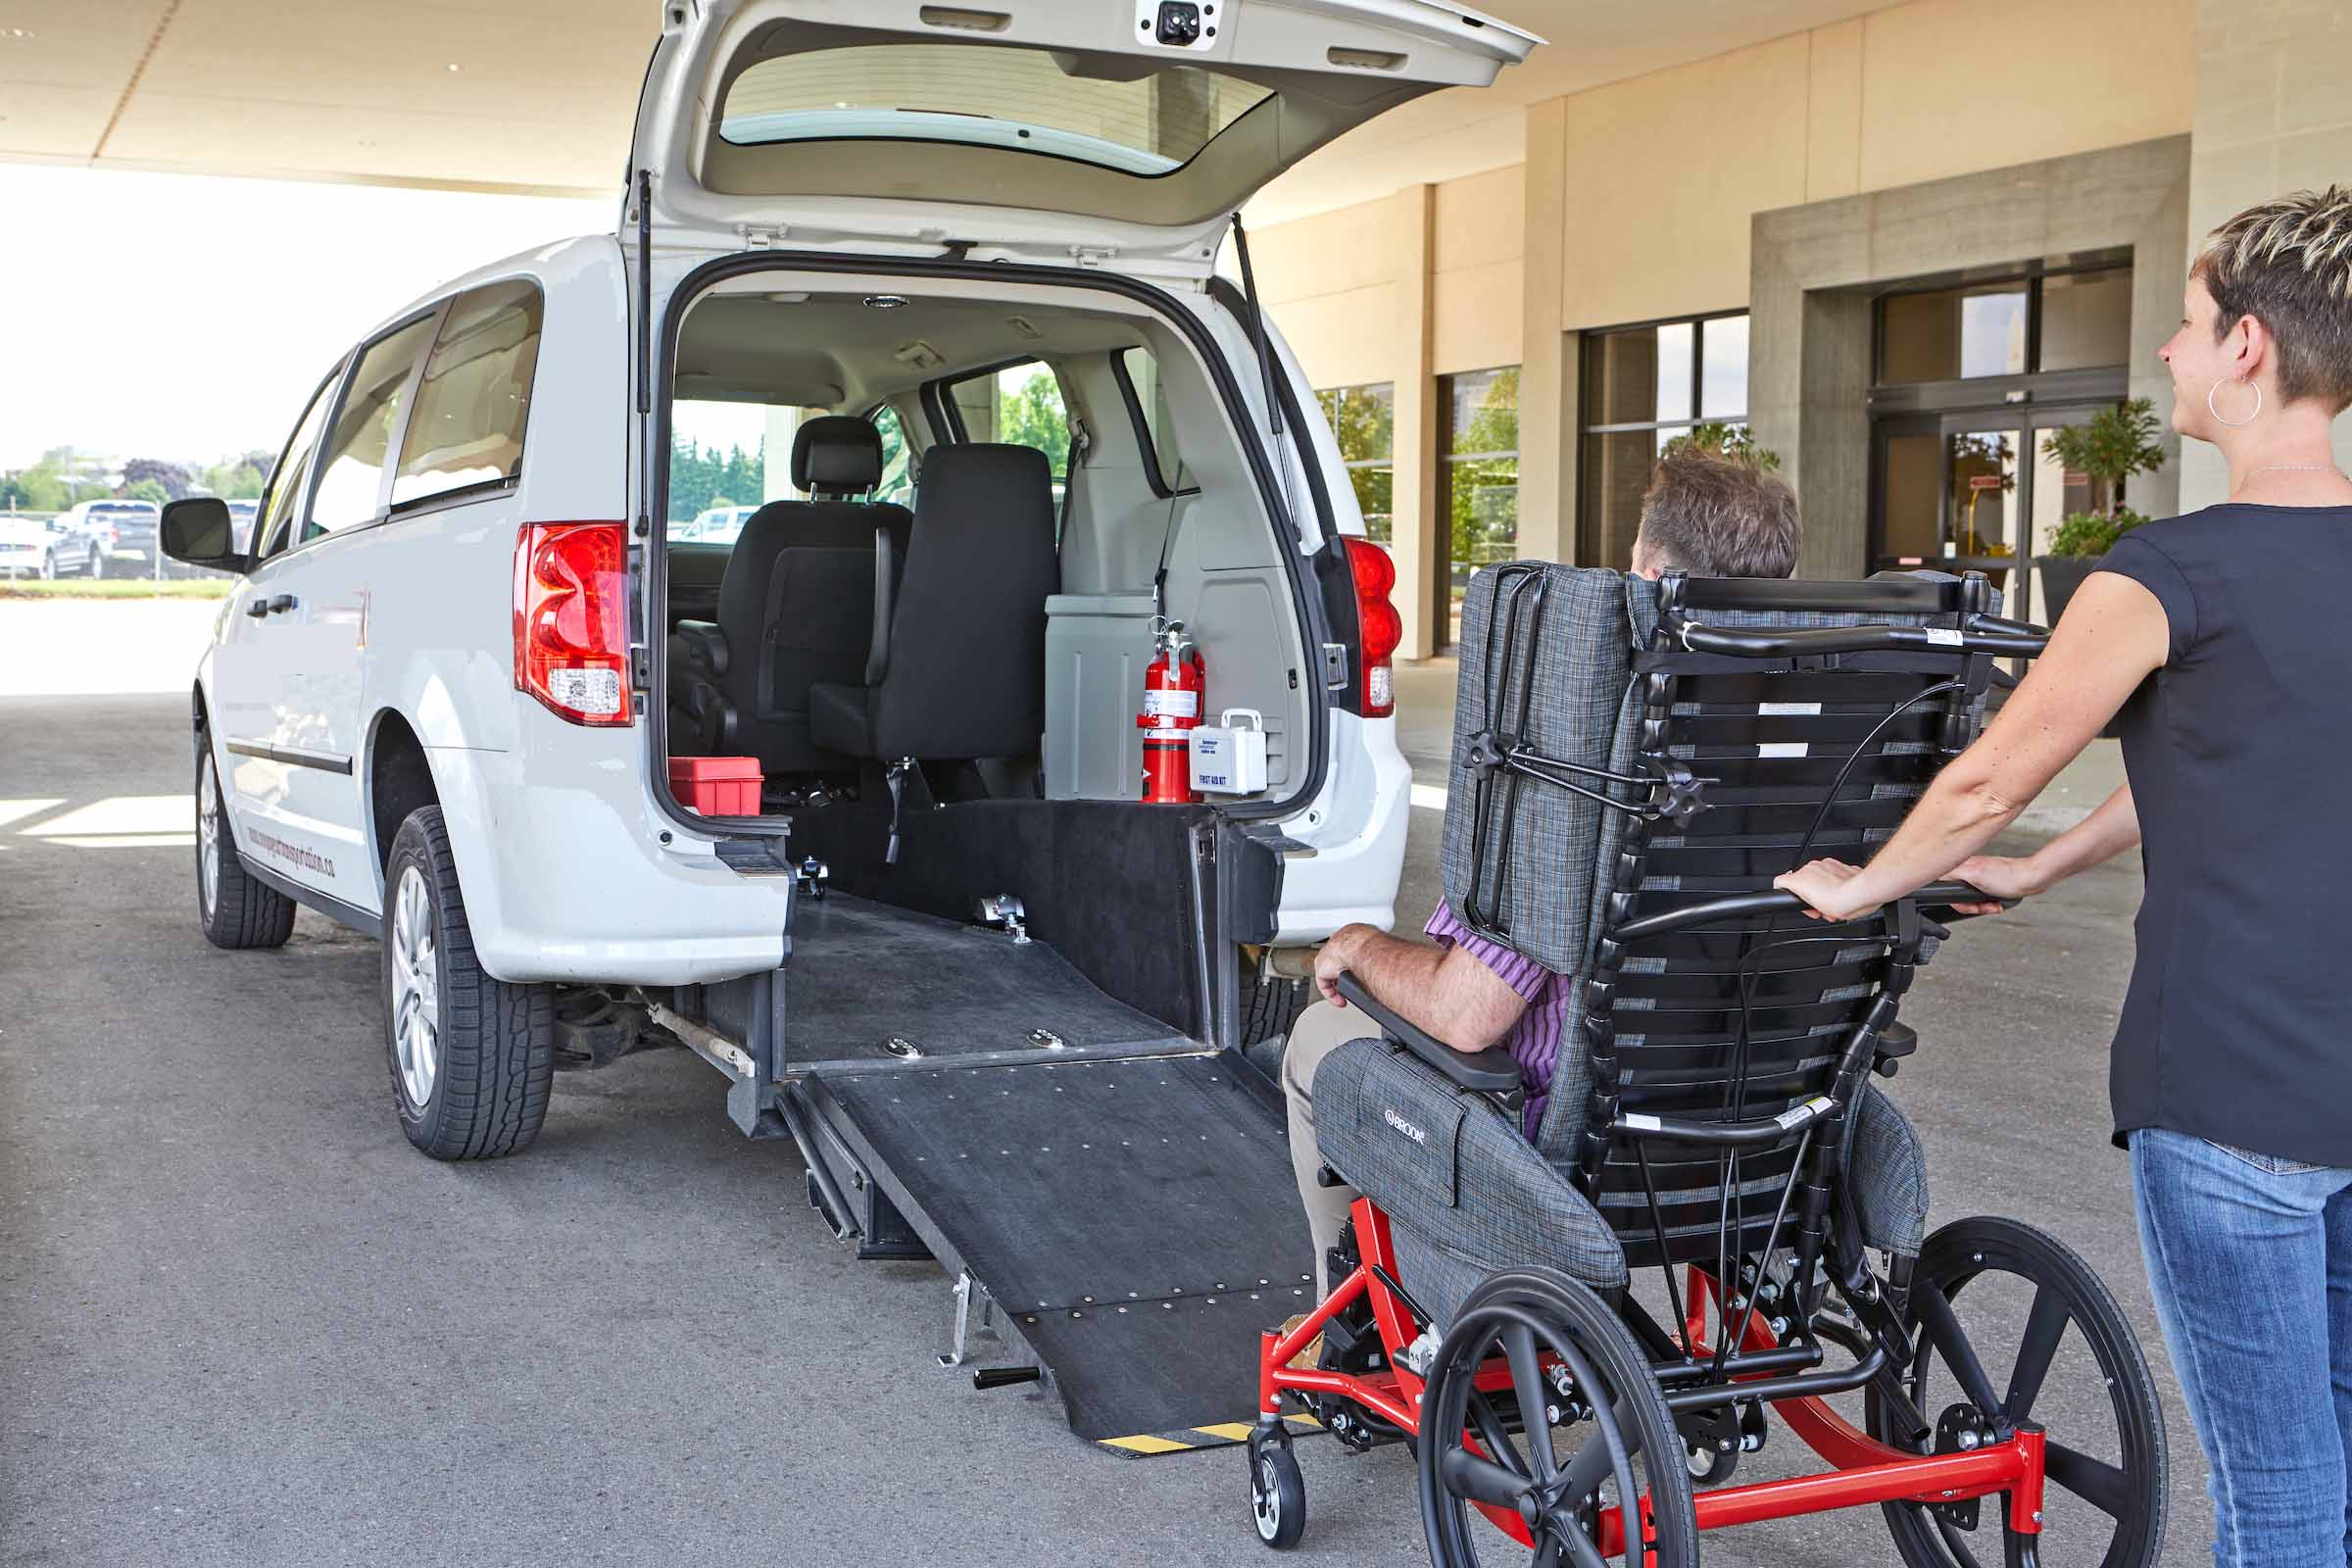 A woman is providing wheelchair transportation services by pushing a wheelchair into a van.